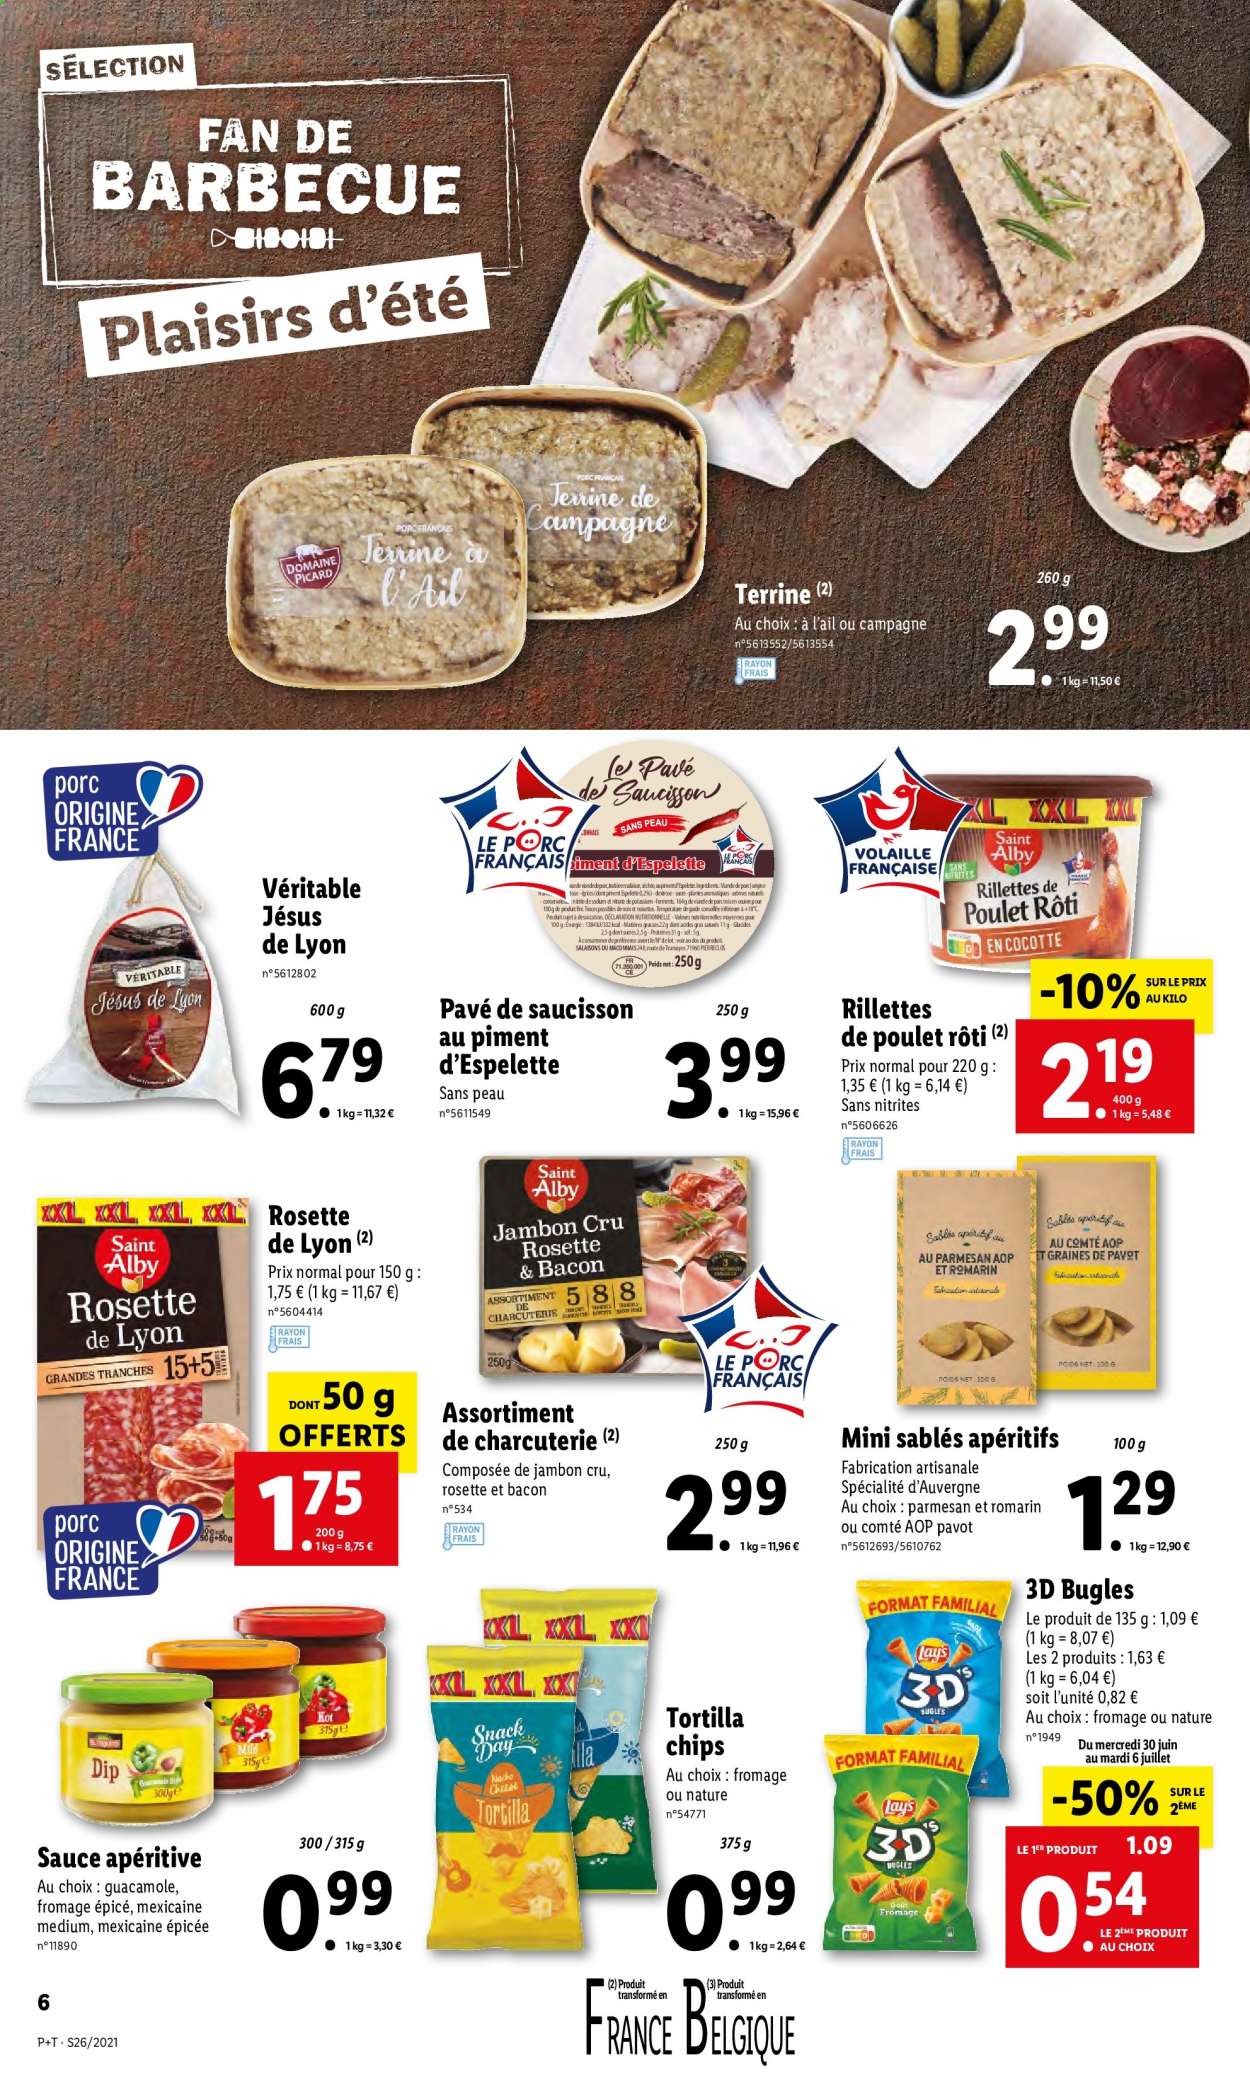 Catalogue Lidl - 30.06.2021 - 06.07.2021. Page 8.